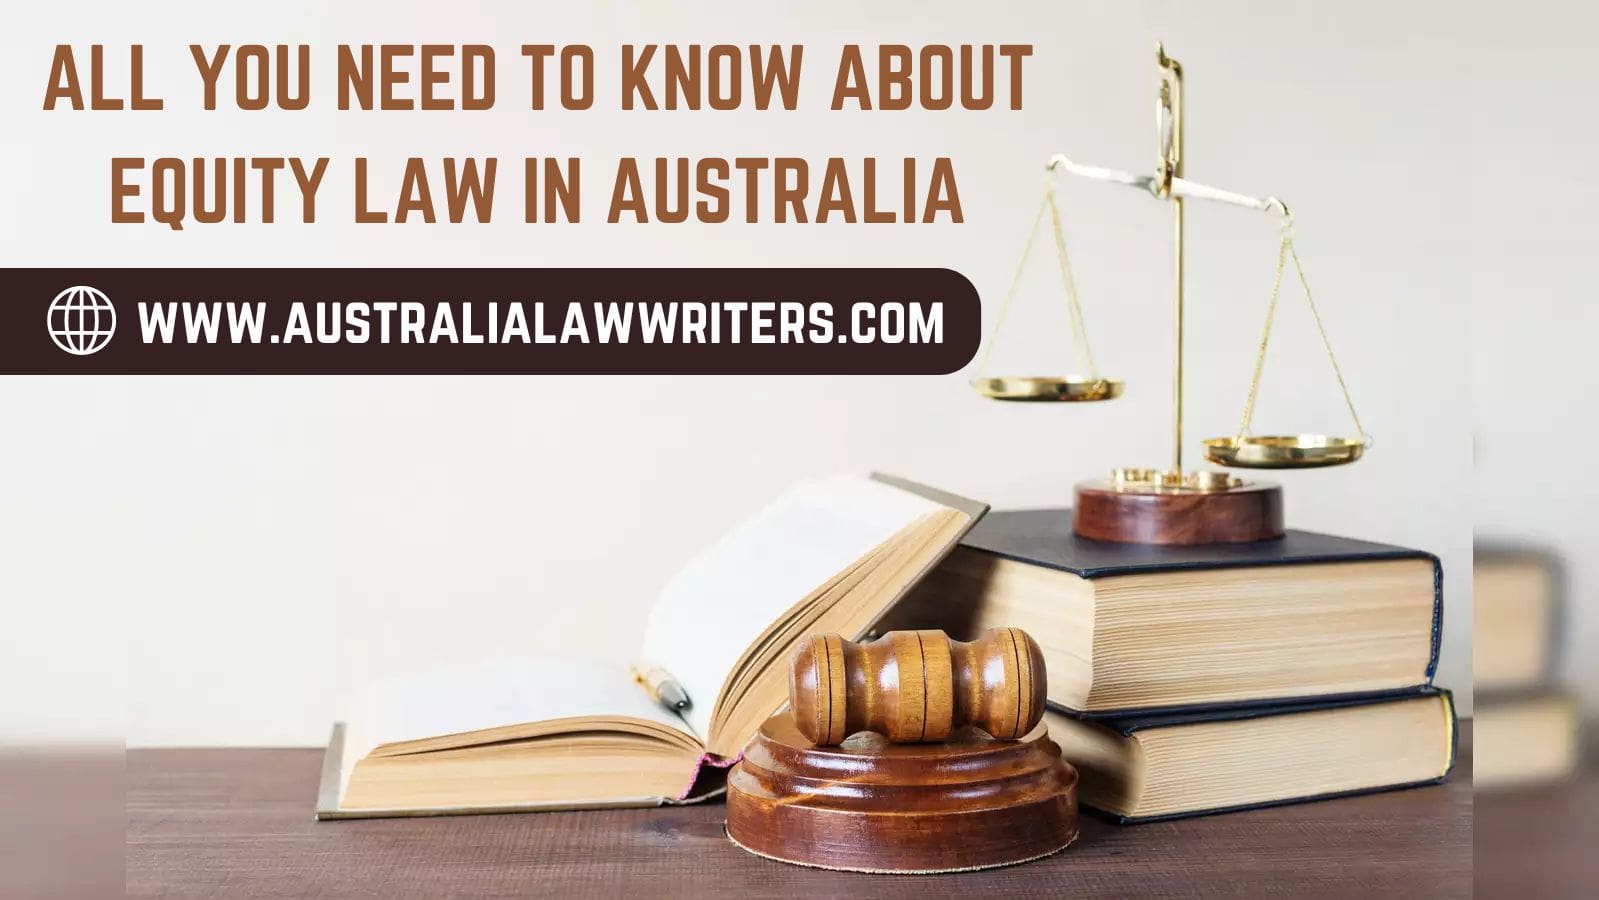 ALL YOU NEED TO KNOW ABOUT EQUITY LAW IN AUSTRALIA